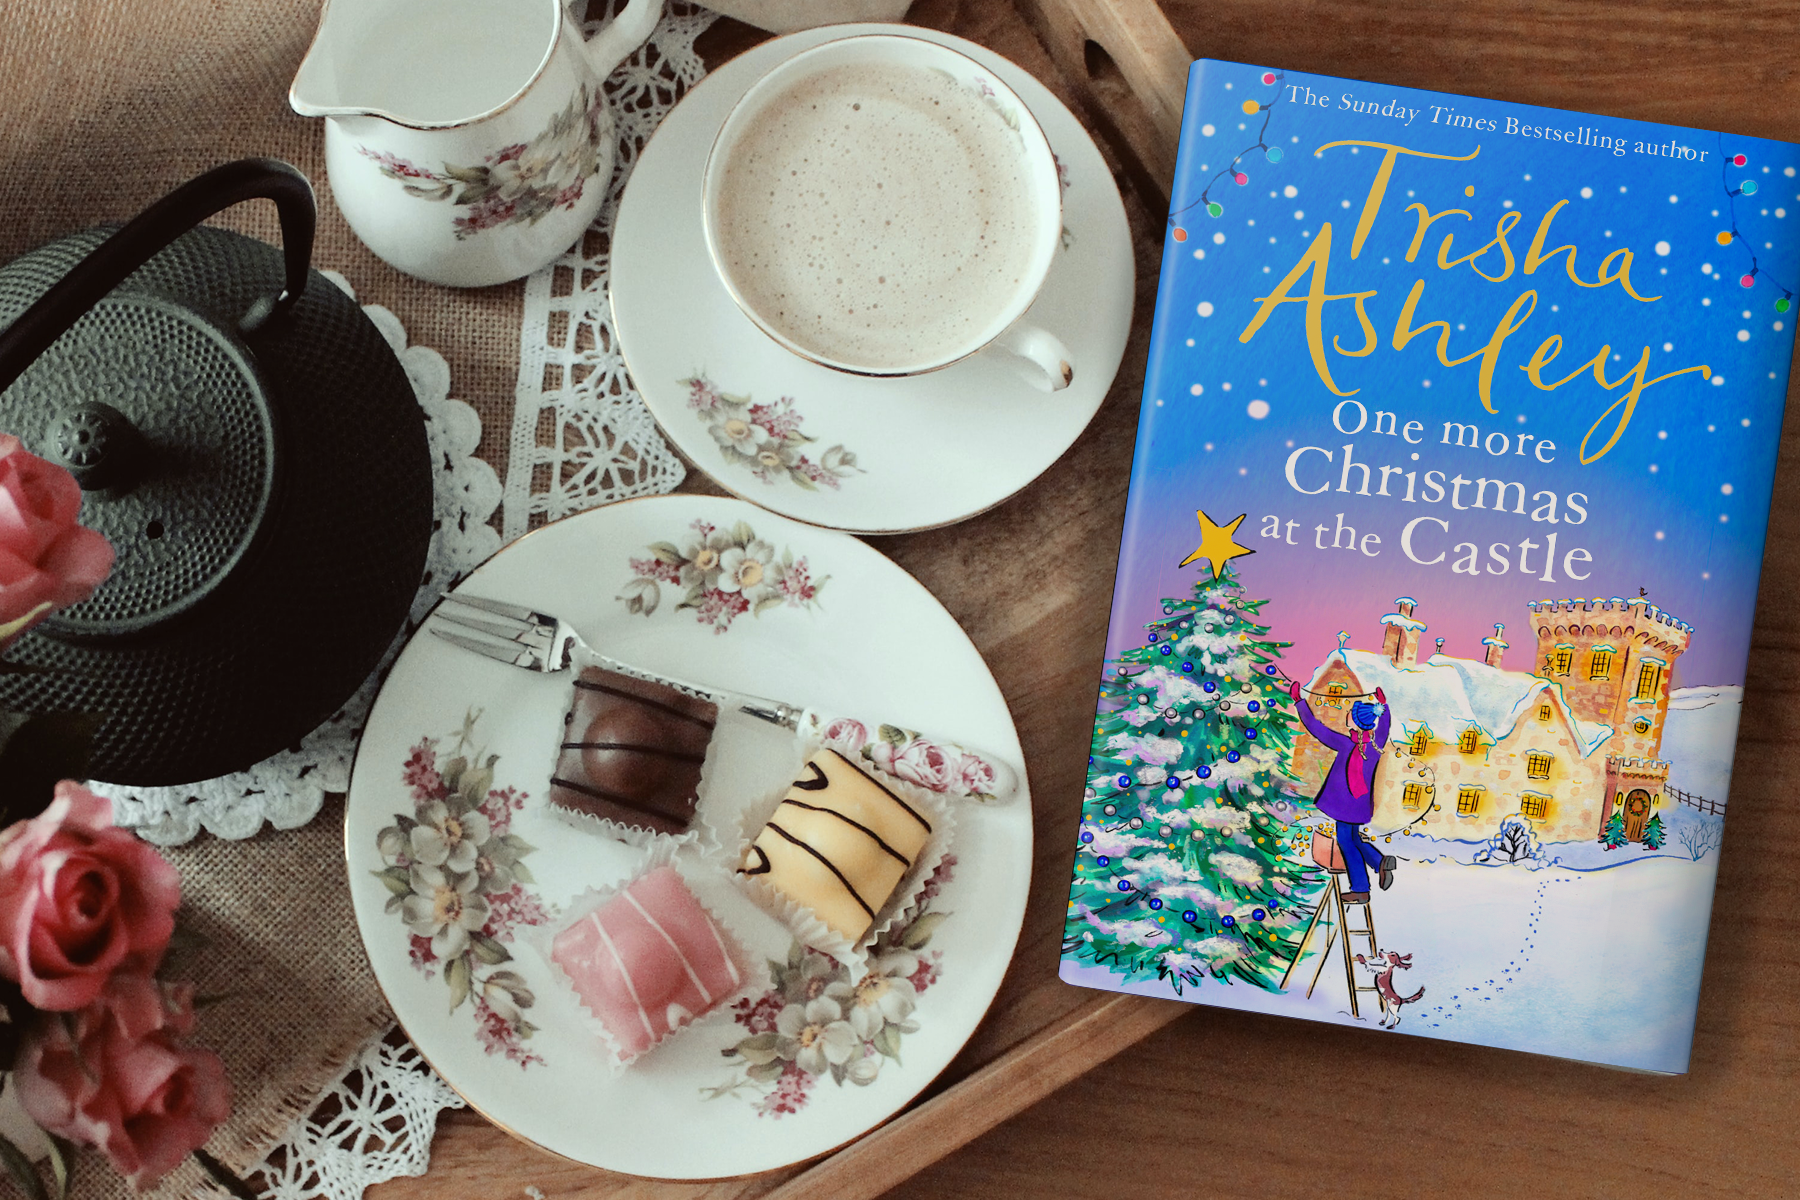 The book One More Christmas at the Castle by Trisha Ashley on a table spread with chocolates, tea and more